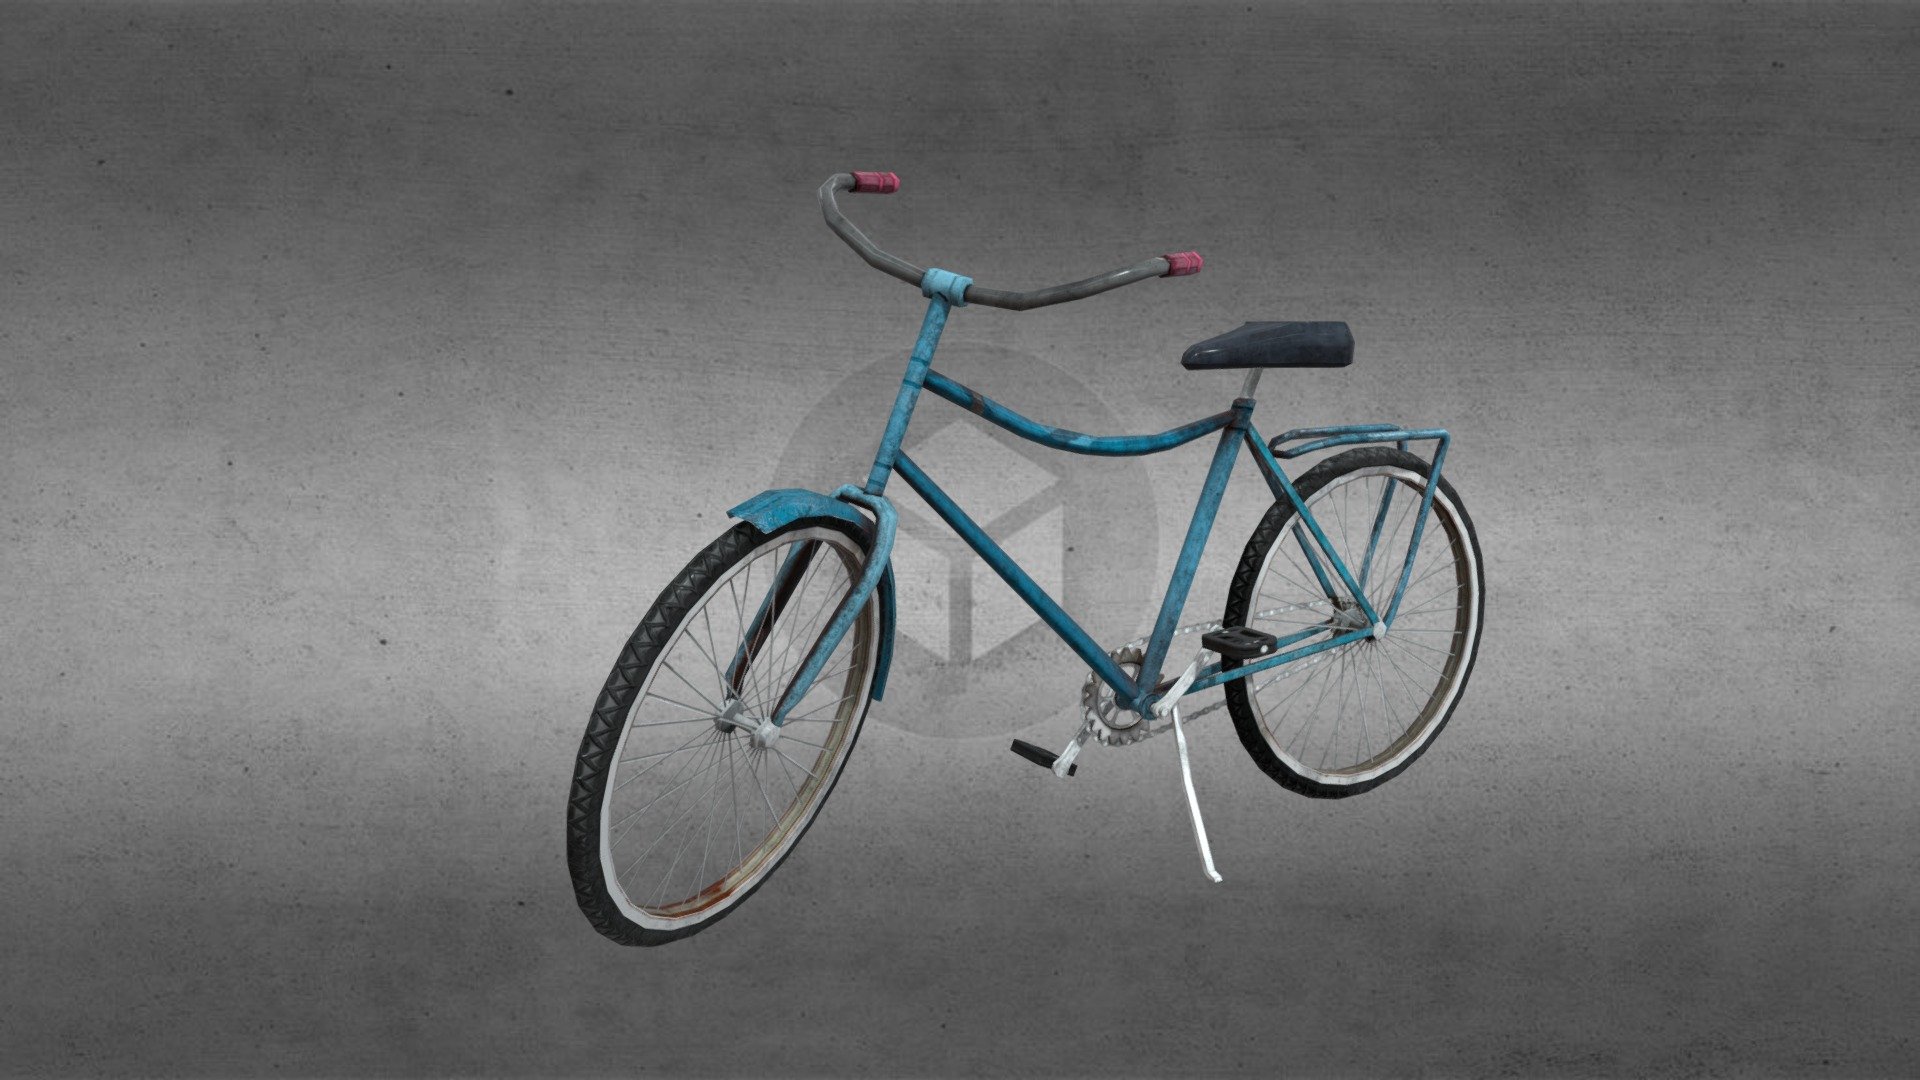 Low Poly Bicyle Art Test. The model was done in Maya then textured in Substance Painter.
Since the Limit is only 3k Tri. I cut off some of the stuff to meet the requirement. Hope it still good. 

ArtStation Link
https://www.artstation.com/artwork/2qVK4a

Oh well the feedback they have was poor baking. with no hipoly, but I indeed submit a highpoly and also request to increase the tri limit abit. But they did get back to me. So this is the final result. In the end I not sure if they check it propely :/ - Lowpoly Blue Stylized Bicyle - 3D model by Makoto Ka Cun (@MakotoKaCun) 3d model